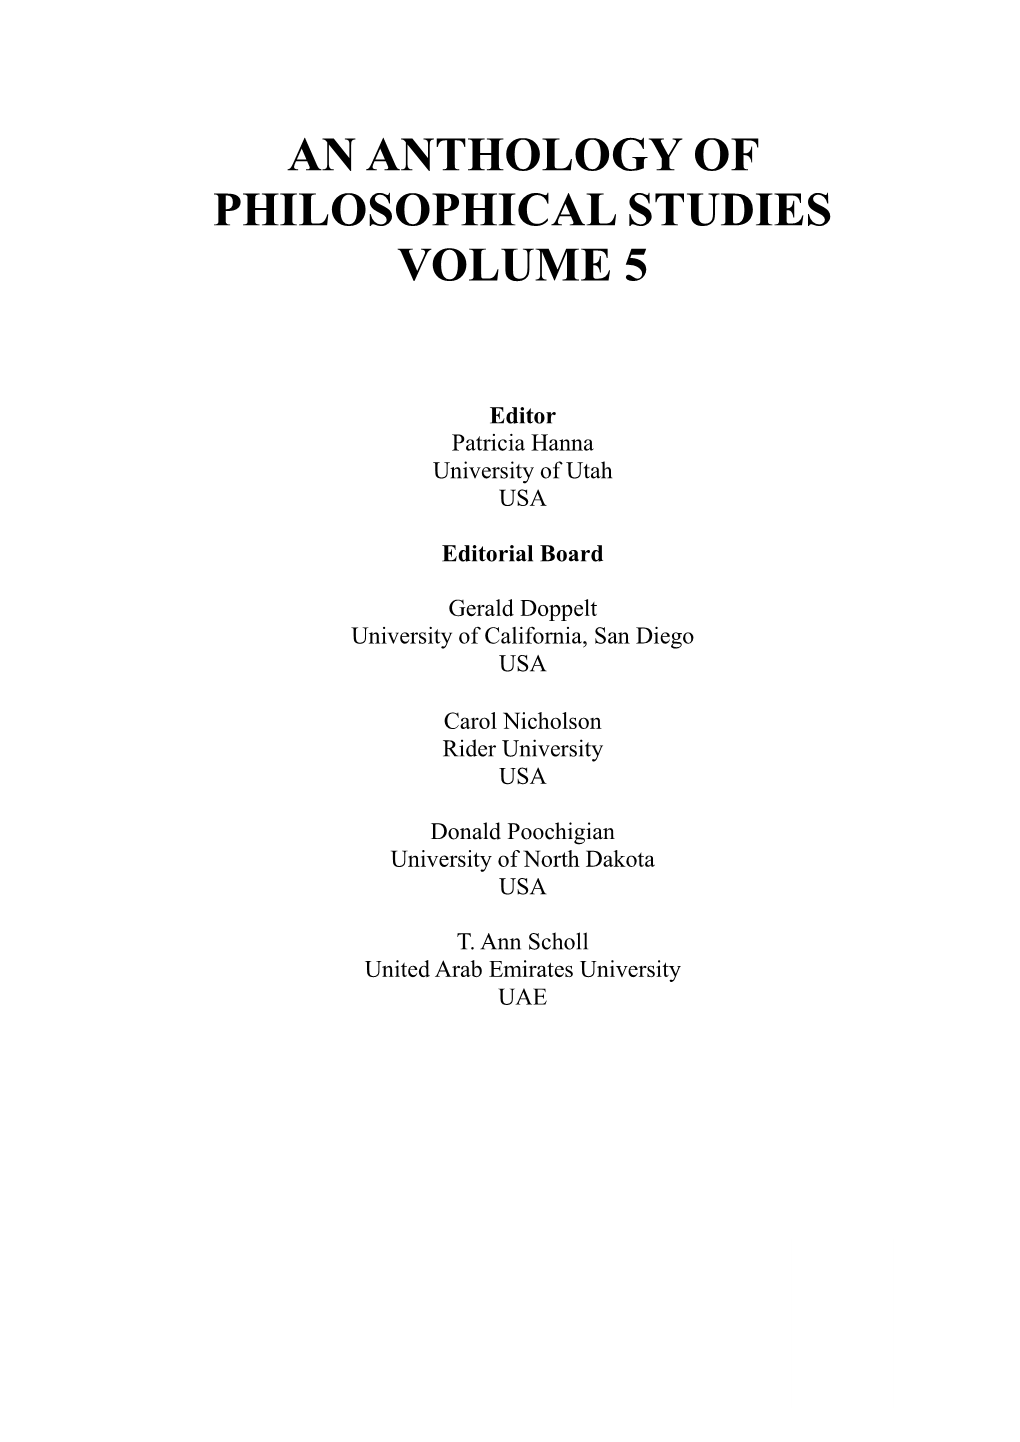 An Anthology of Philosophical Studies Volume 5